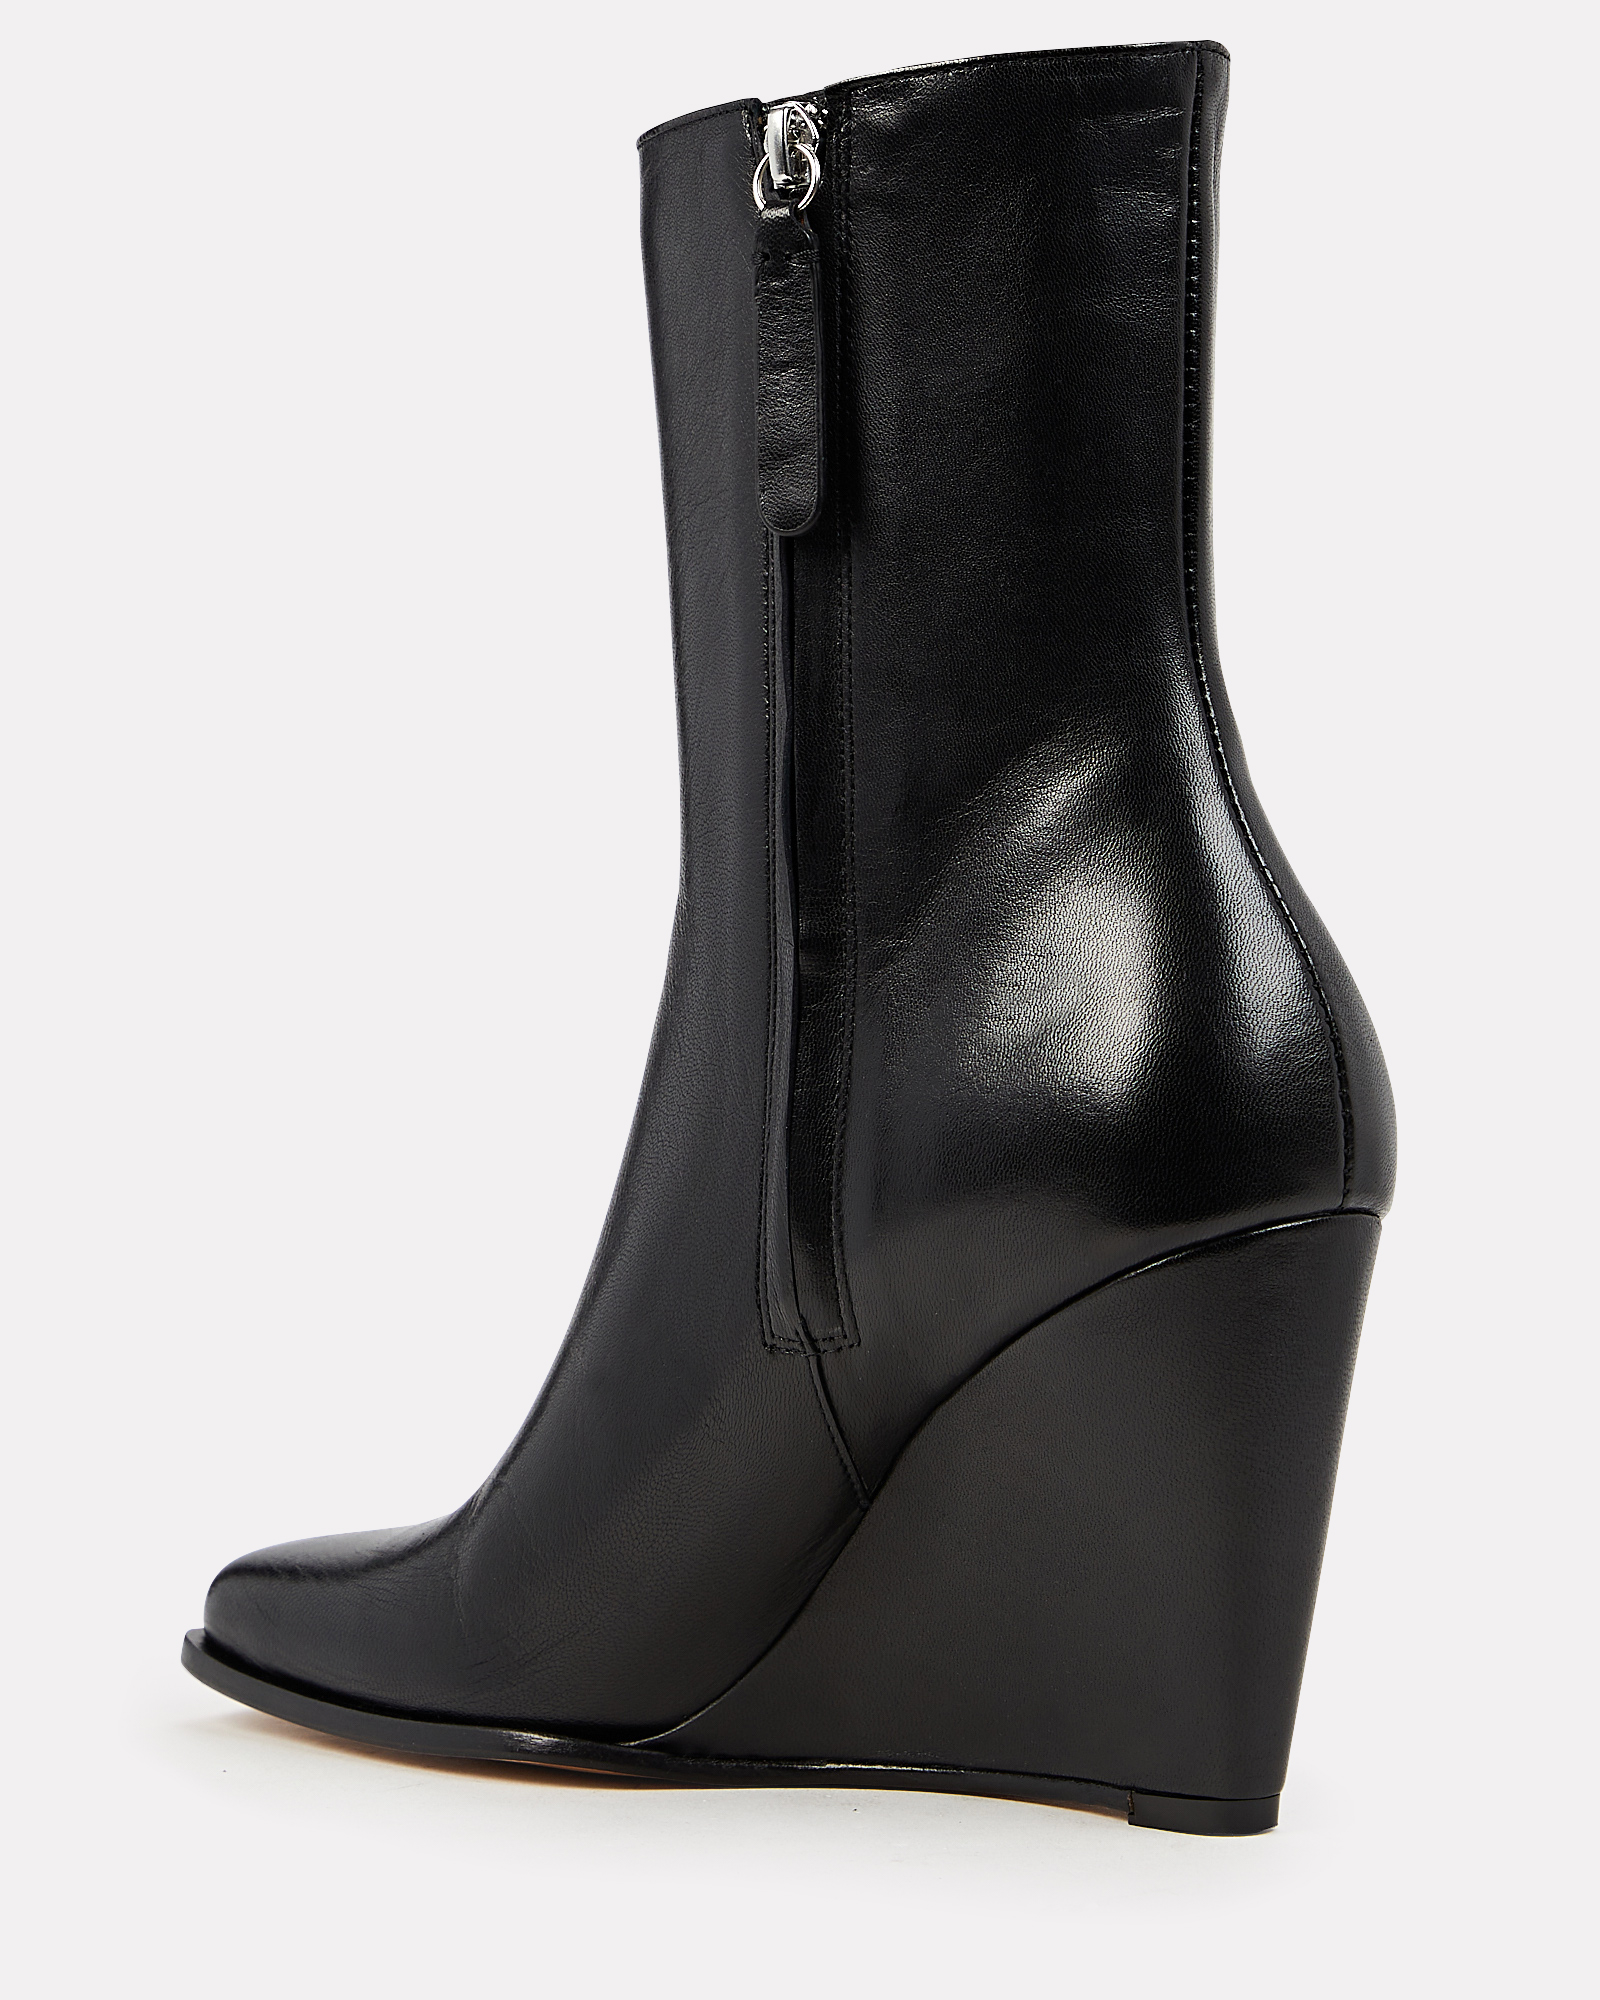 Wandler Gaia Wedge Ankle Boots In Black | INTERMIX®